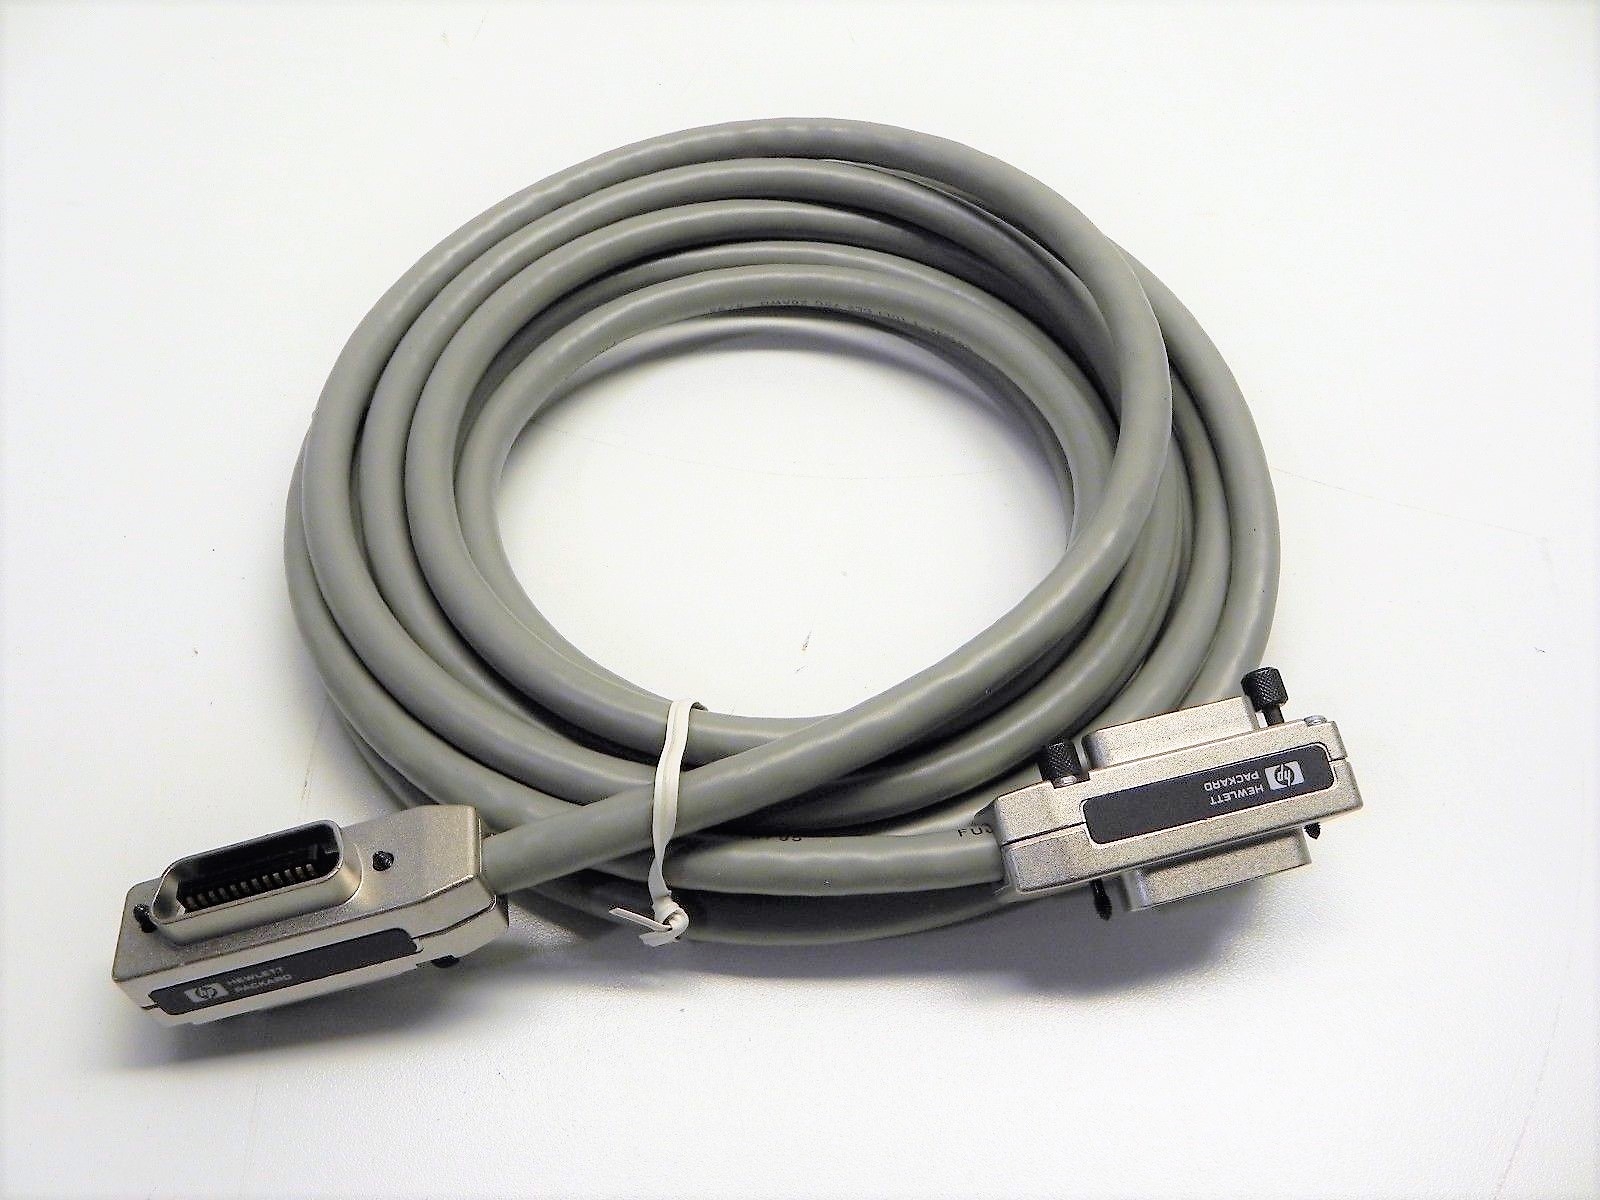 Keysight 10833F HPIB Cable, 6 Meter